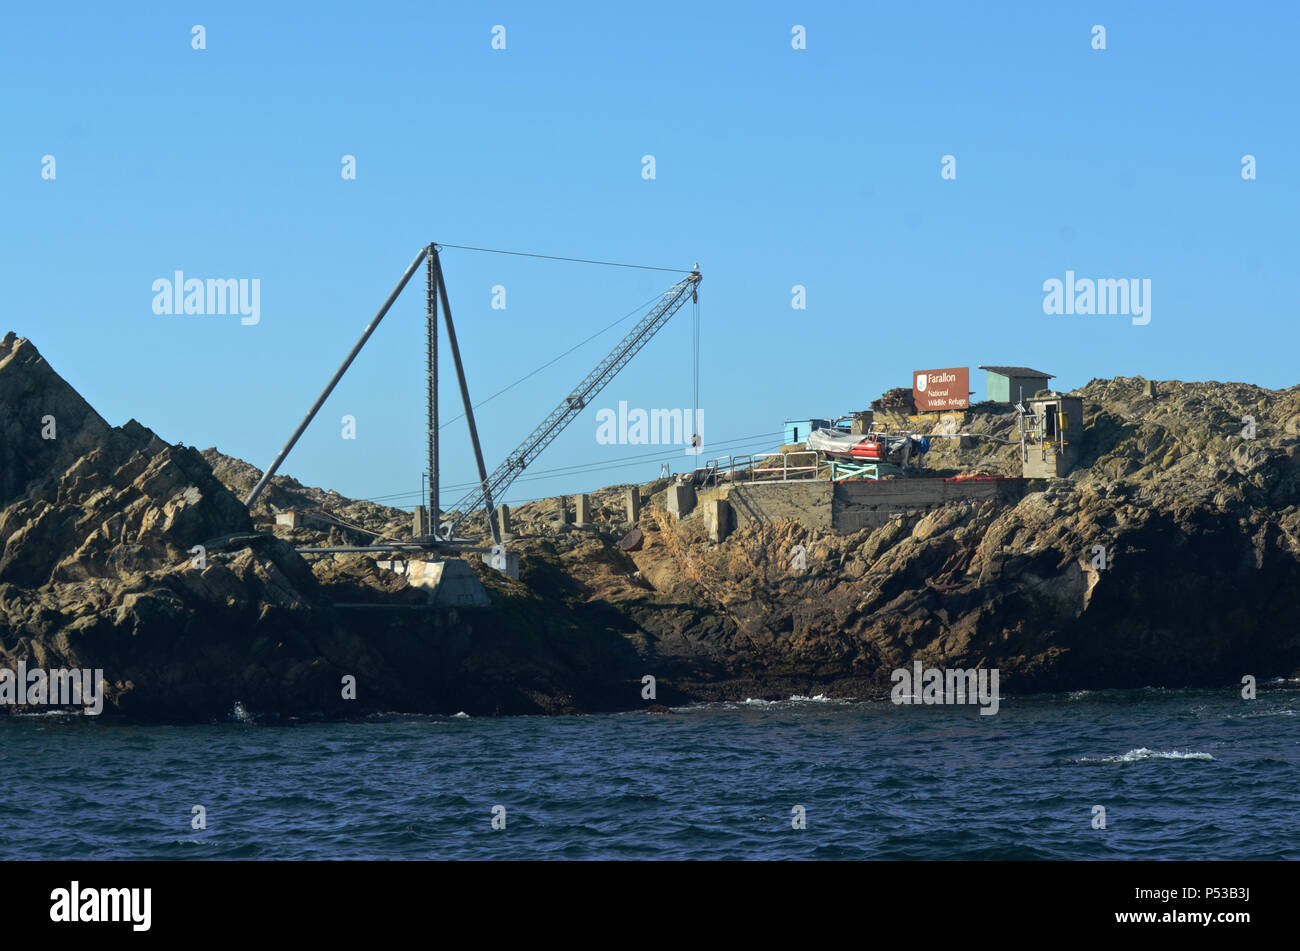 The crane and boat platform on the Southeast Farallon Island, allowing researchers to get on and off the island, and receive supplies. Stock Photo